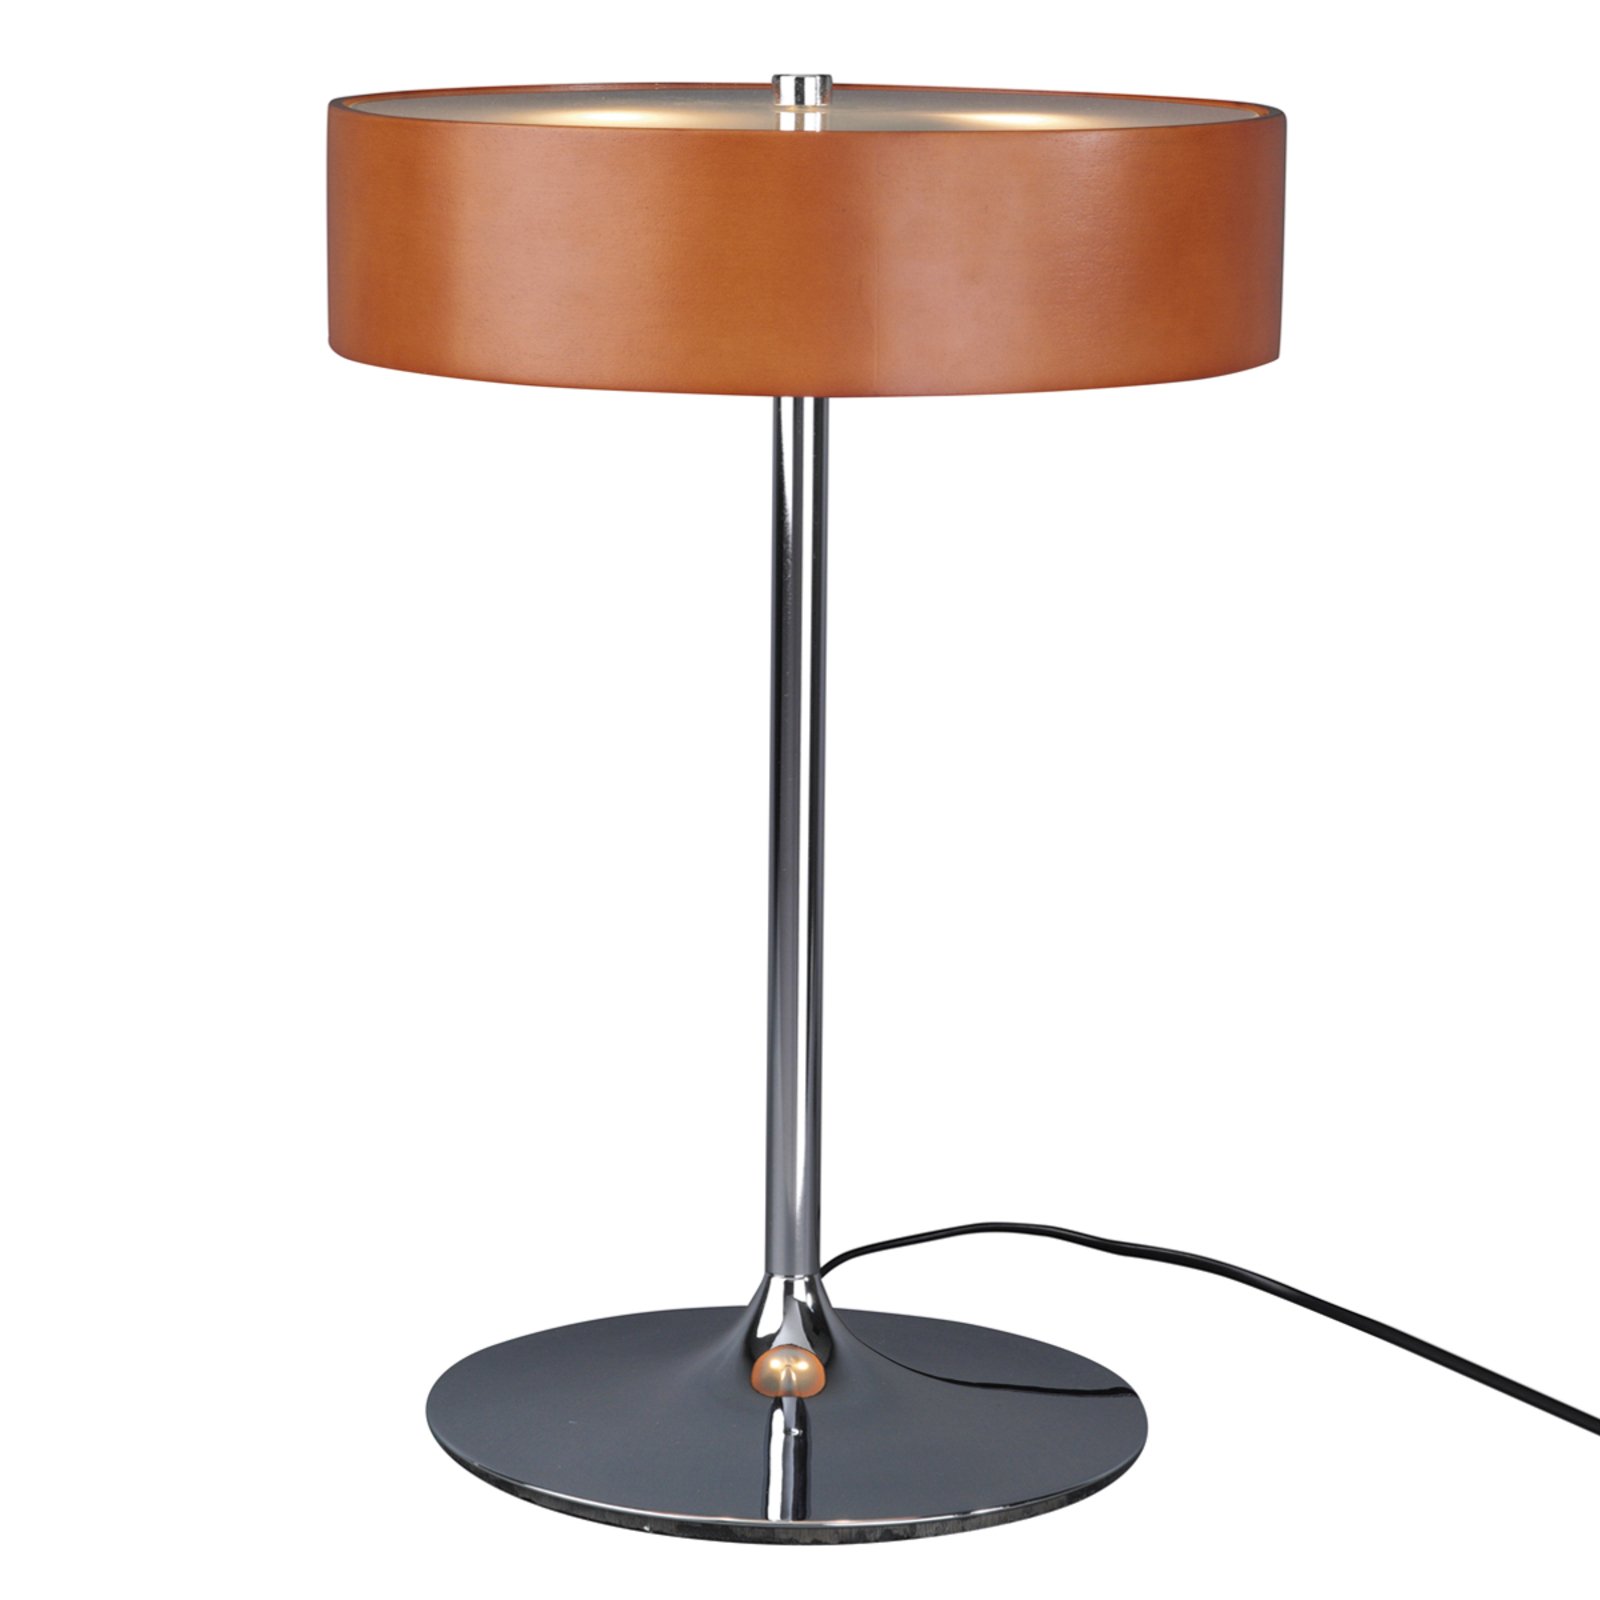 Malibu - a table lamp with cherry wood